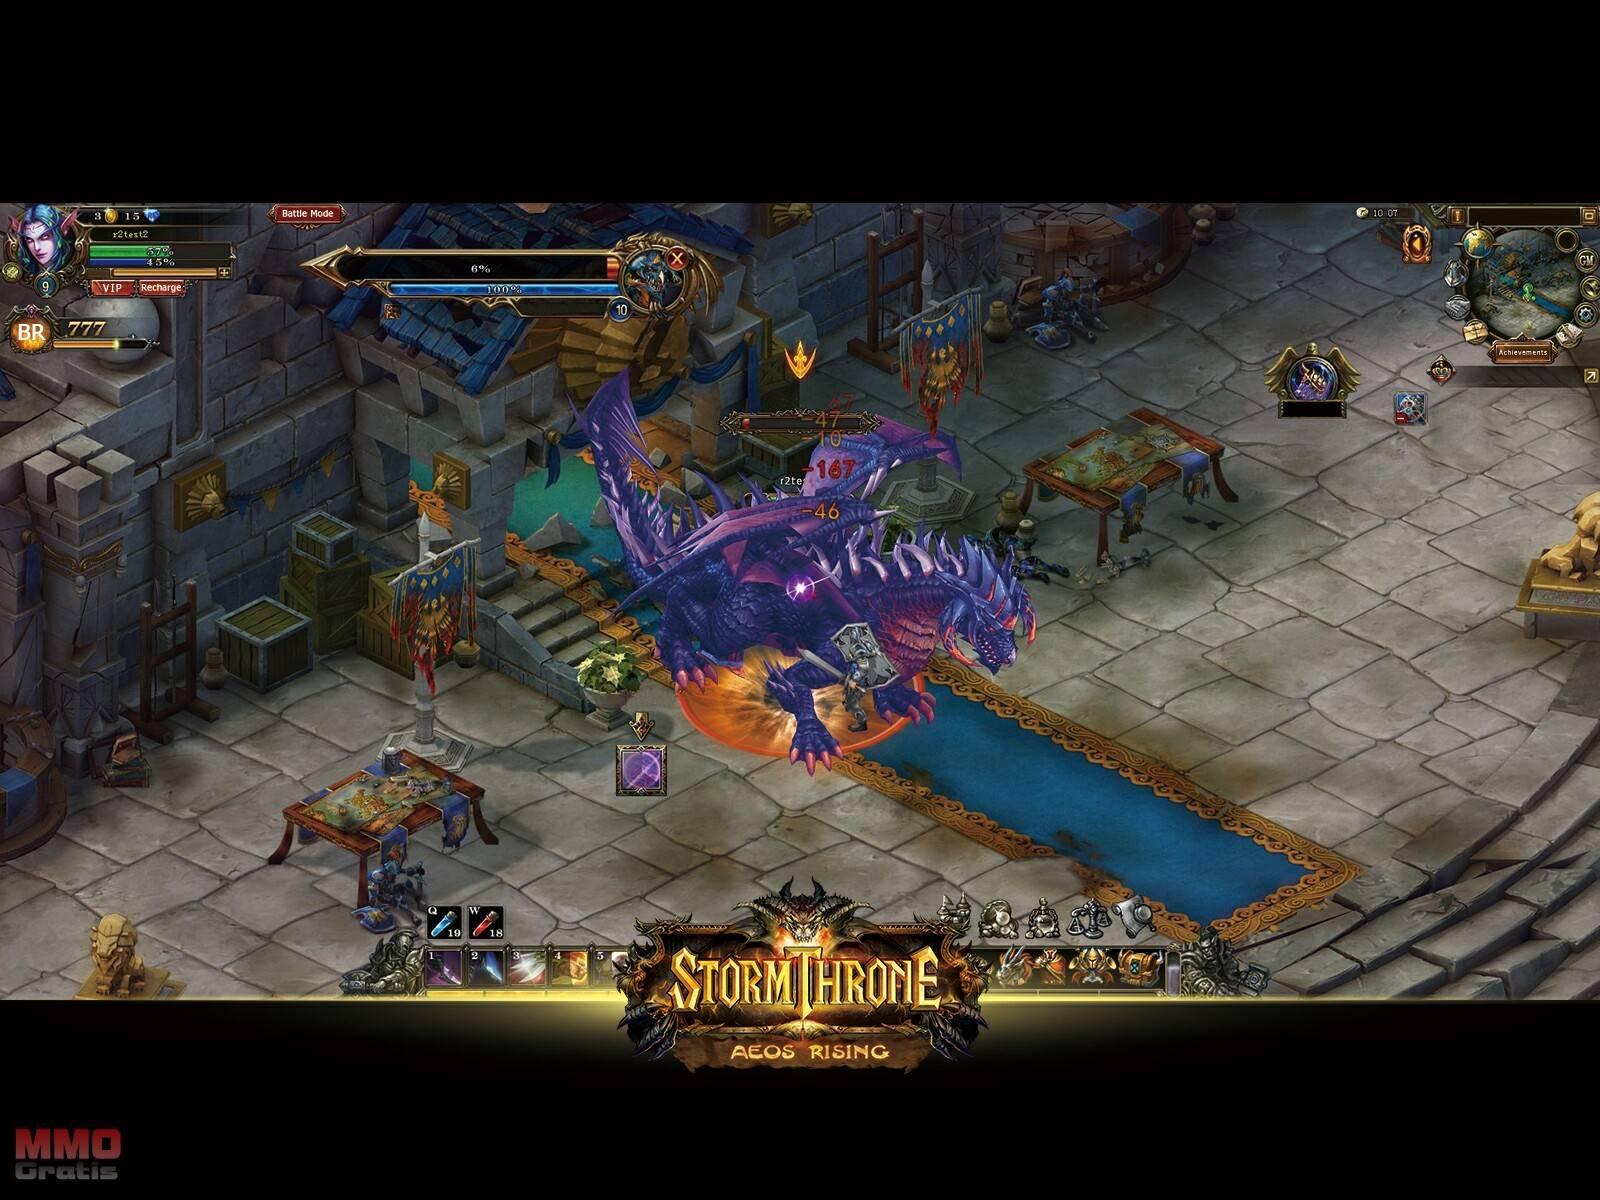 Play Free Online Games, MMORPG, Browser Games - R2Games